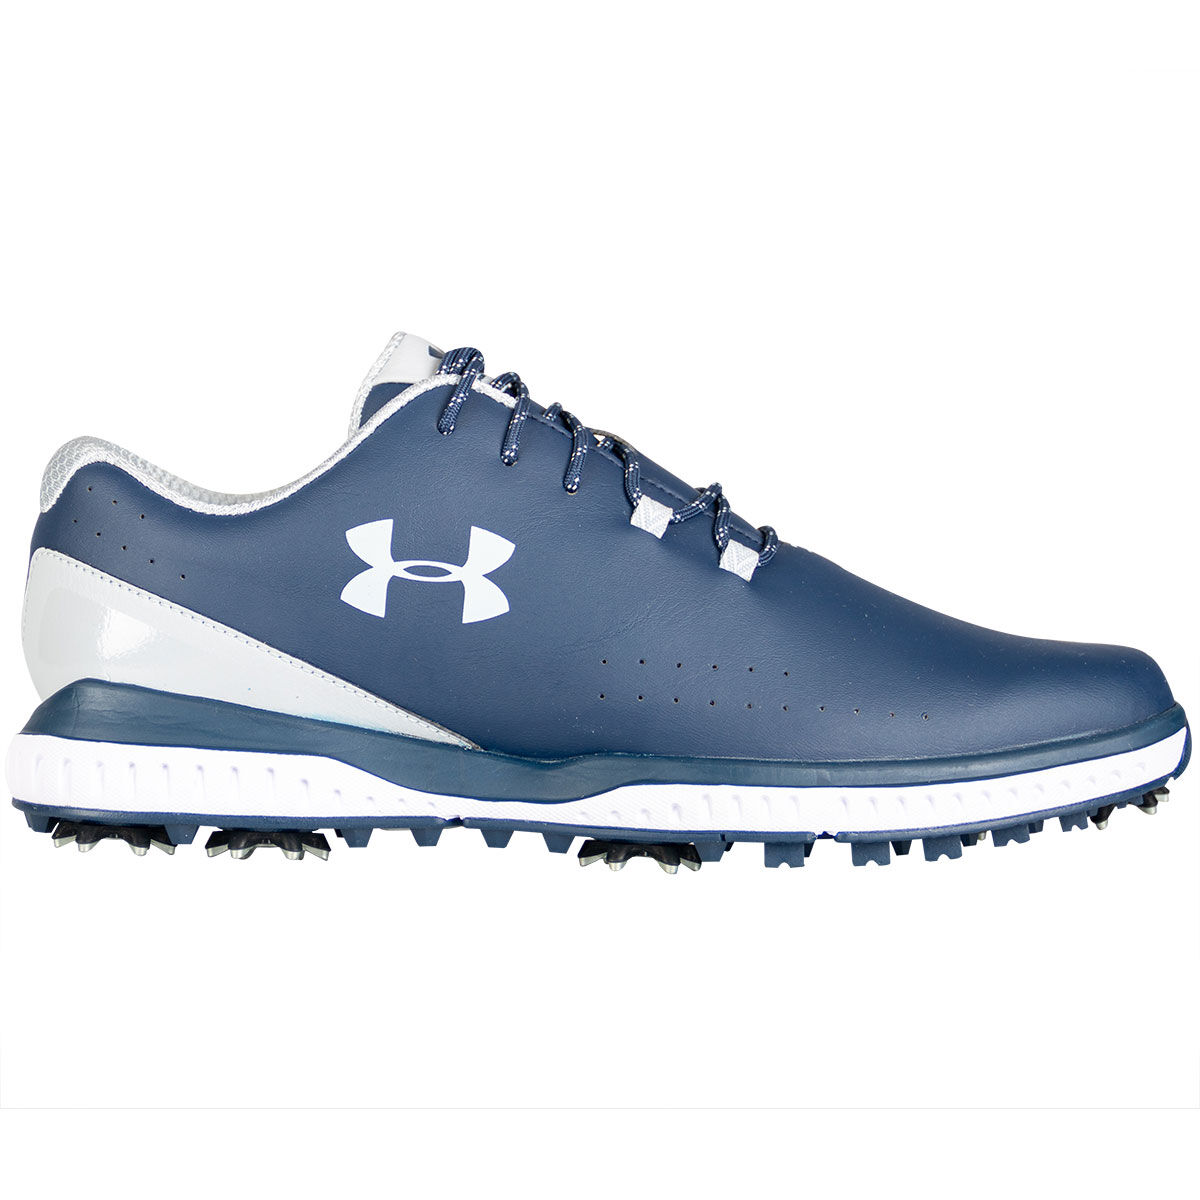 Spiked Golf Shoes | Men's Spiked Golf 